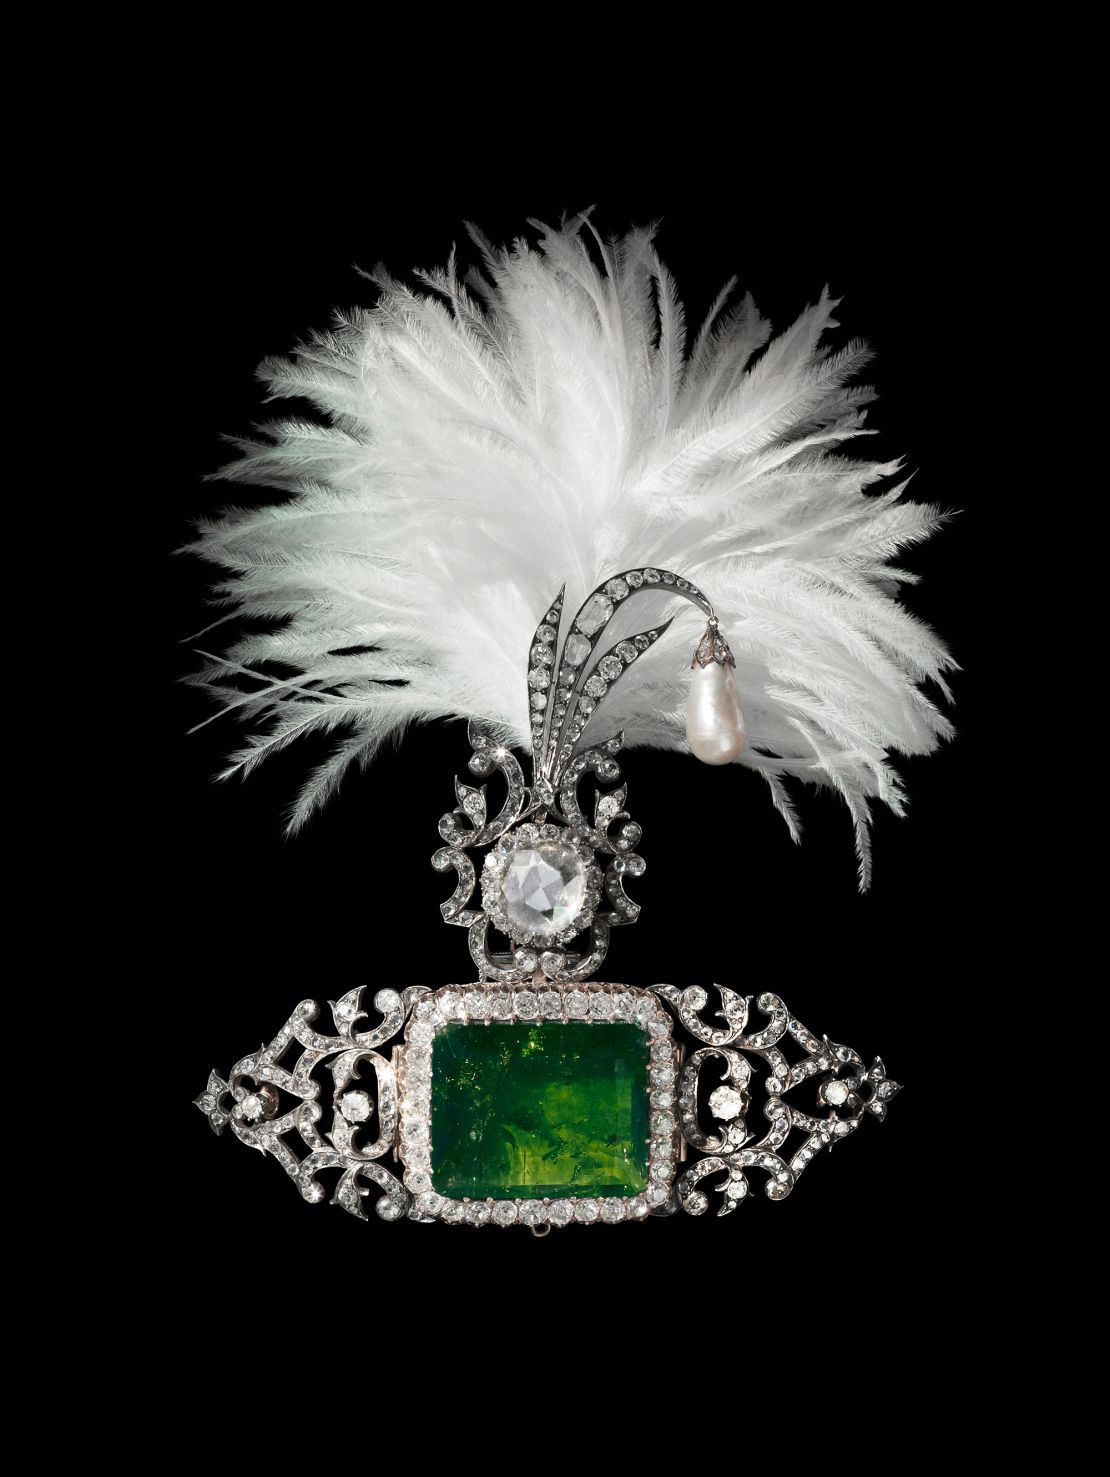 Here the border of brilliant-cut diamonds and a substantial emerald echo European jewelry designs as the gems are not encased in closed settings that were typical of Indian jewelry.